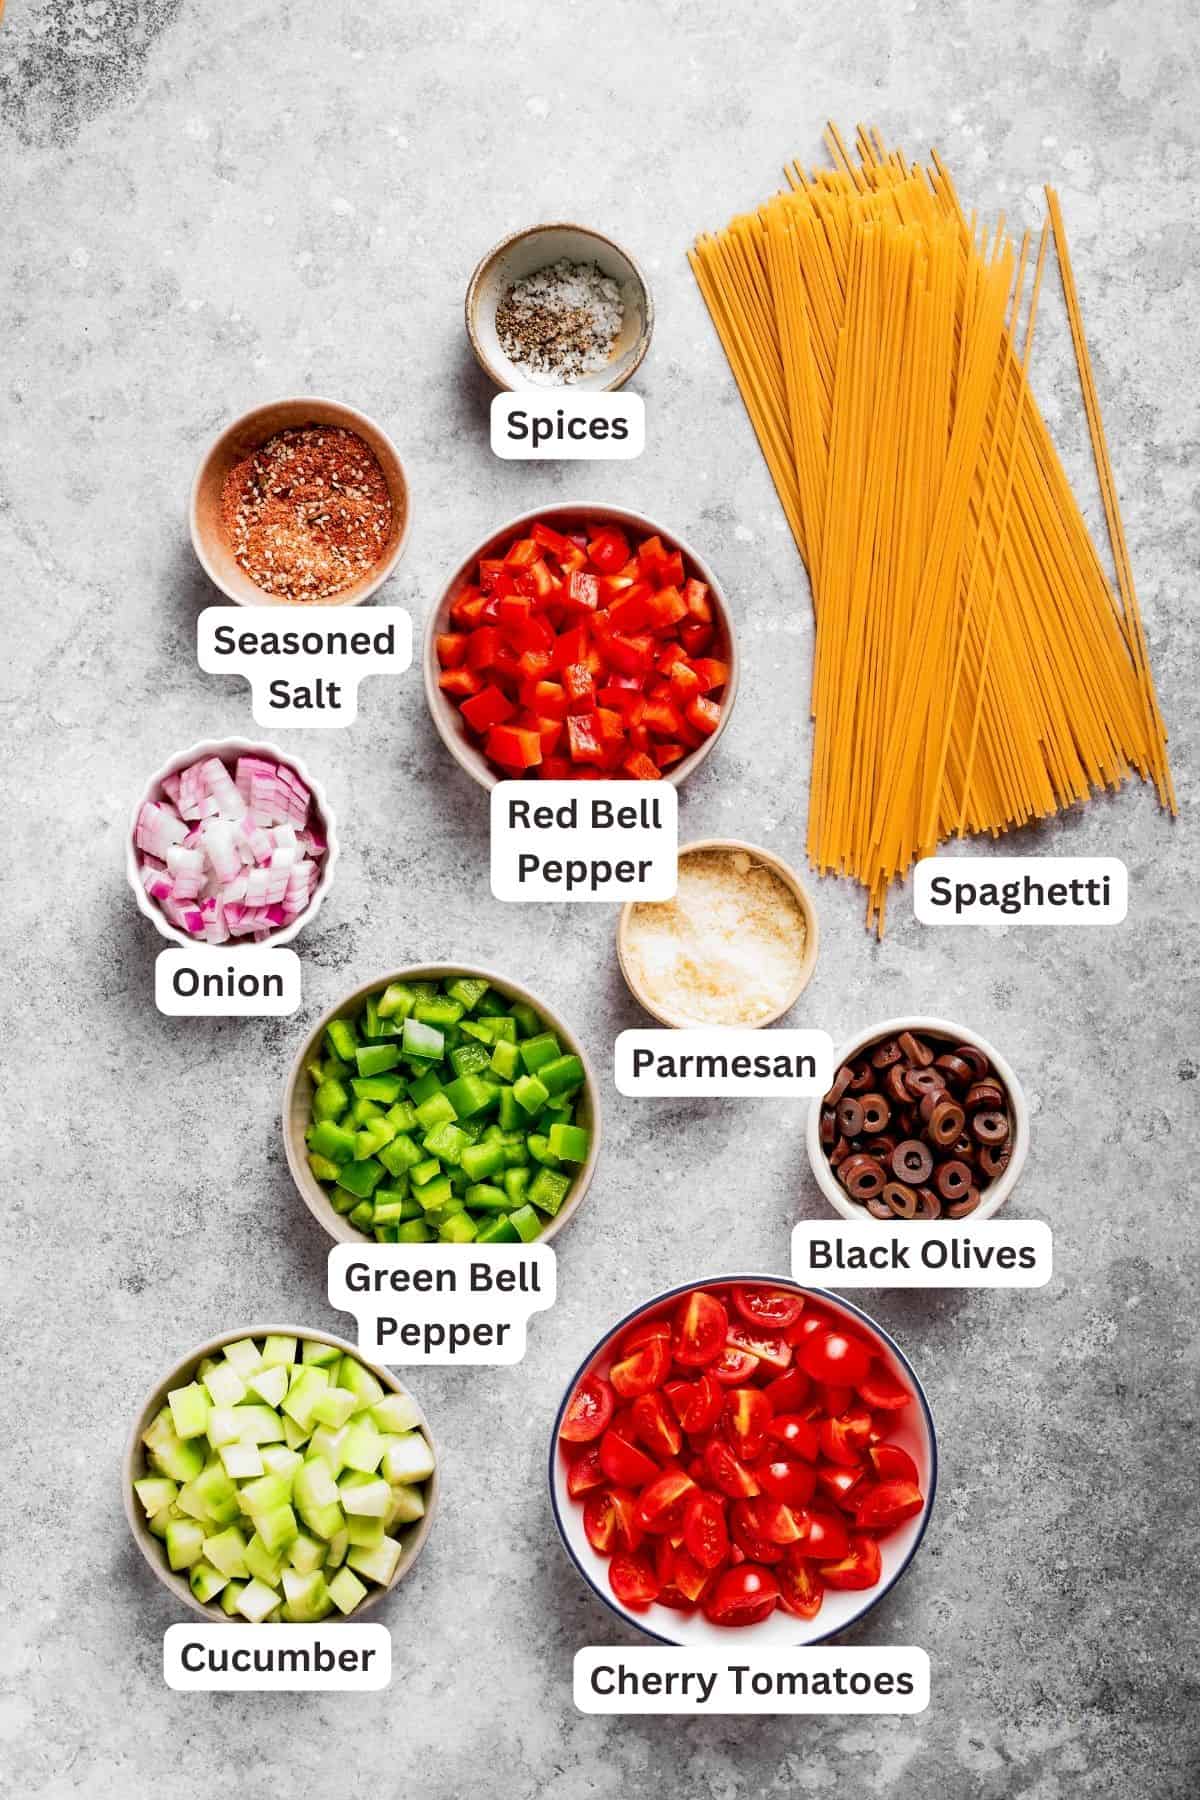 Ingredients for spaghetti salad are labeled and portioned out: spaghetti, cucumber, tomatoes, onion, bell peppers, black olives, parmesan.